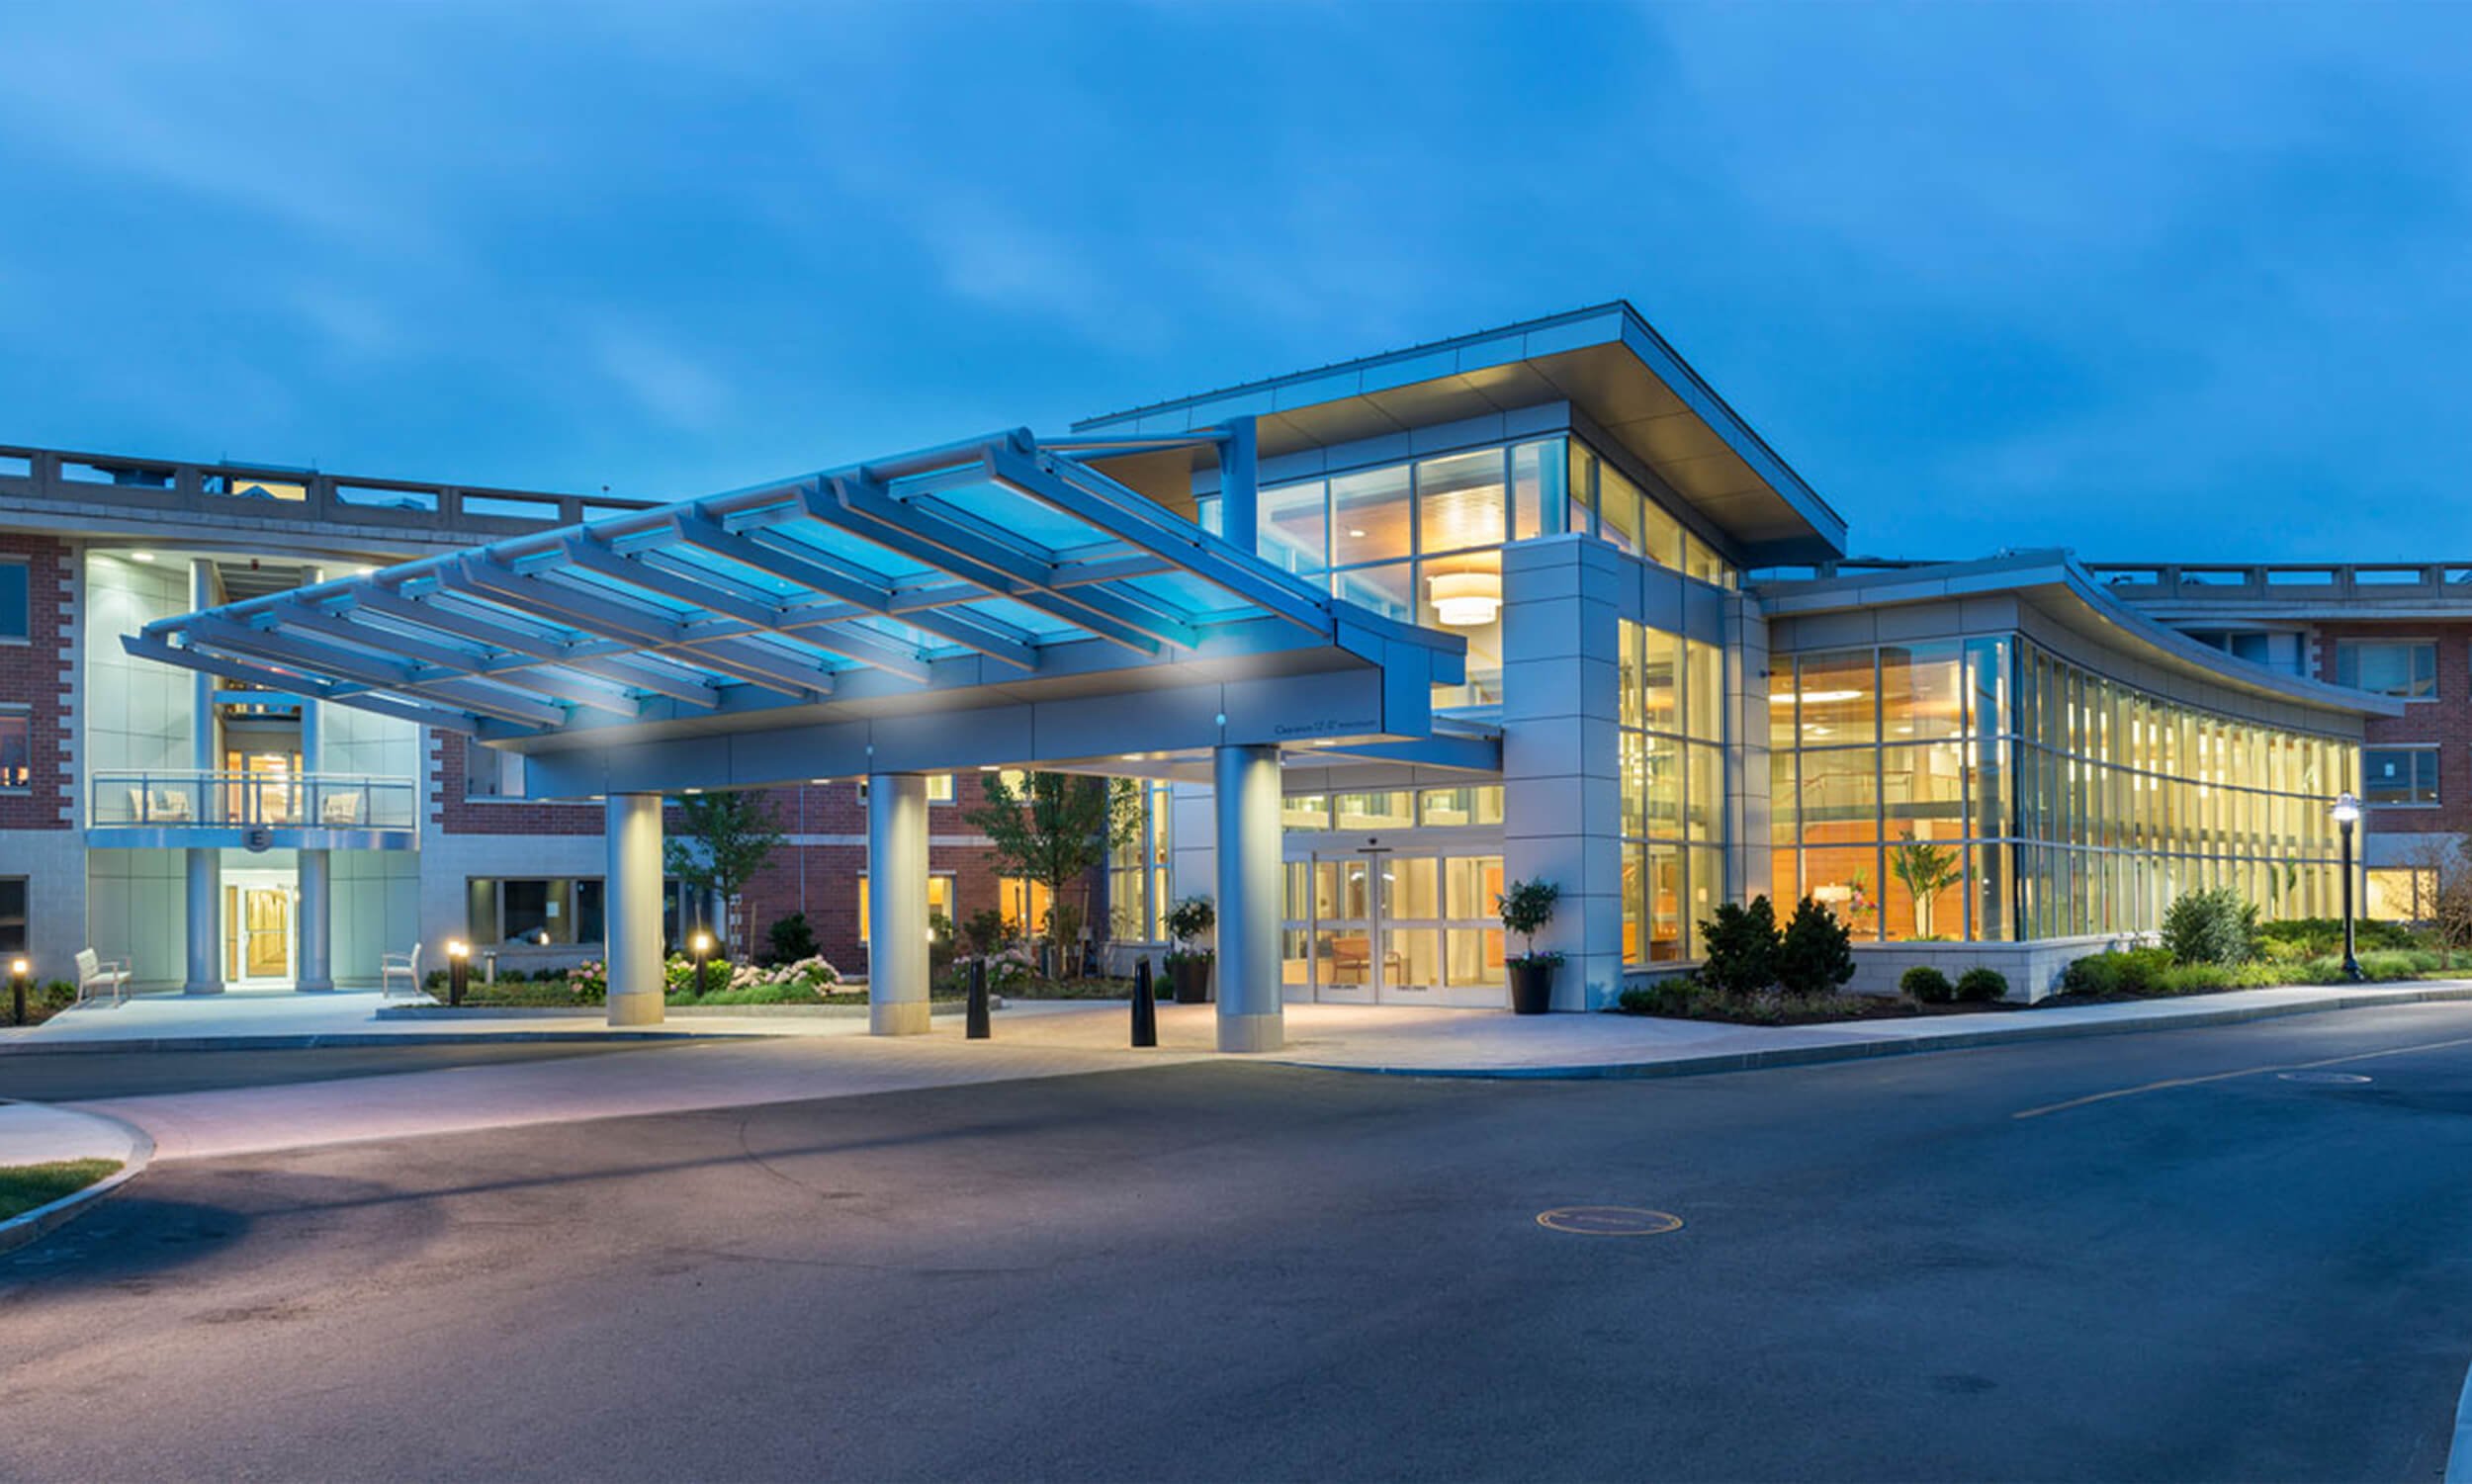 Exterior view of the entryway to a senior living community. The photo is taken at dusk, with lights inside the building illuminating it from within. Large floor-to-ceiling glass walls are featured on the facade.